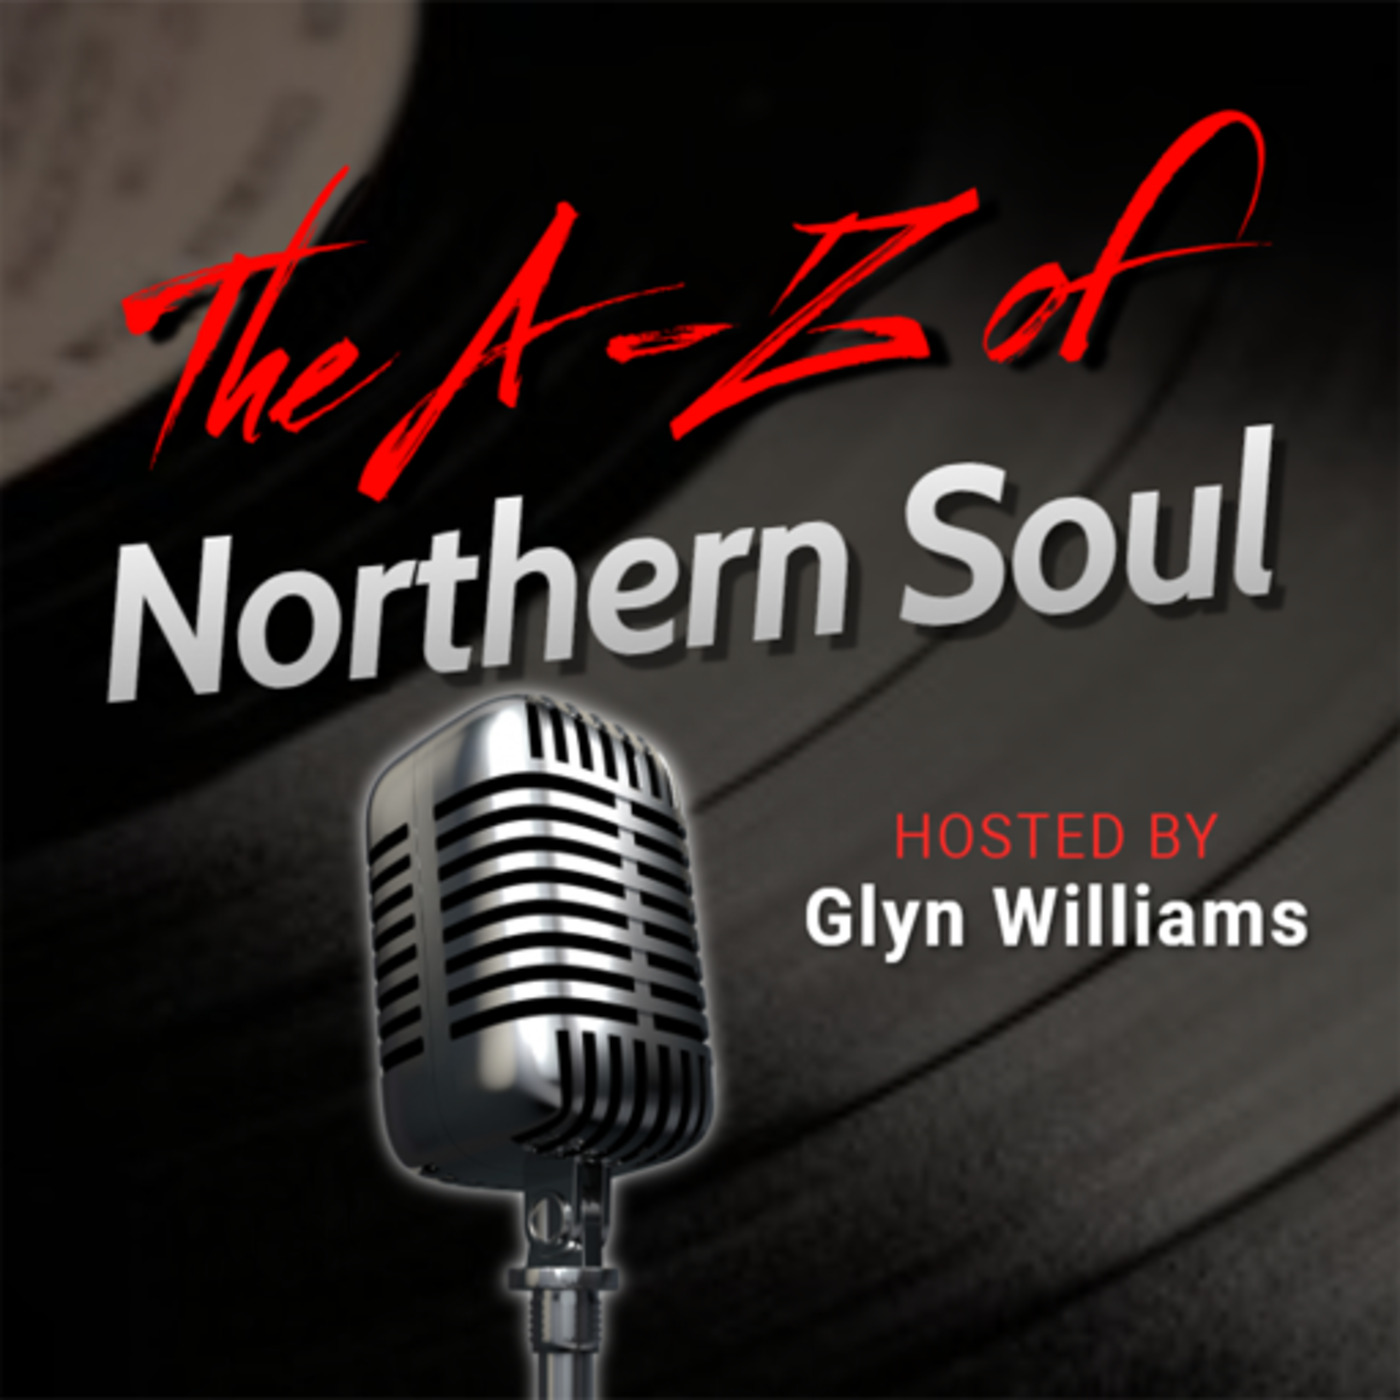 The A-Z of Northern Soul E045